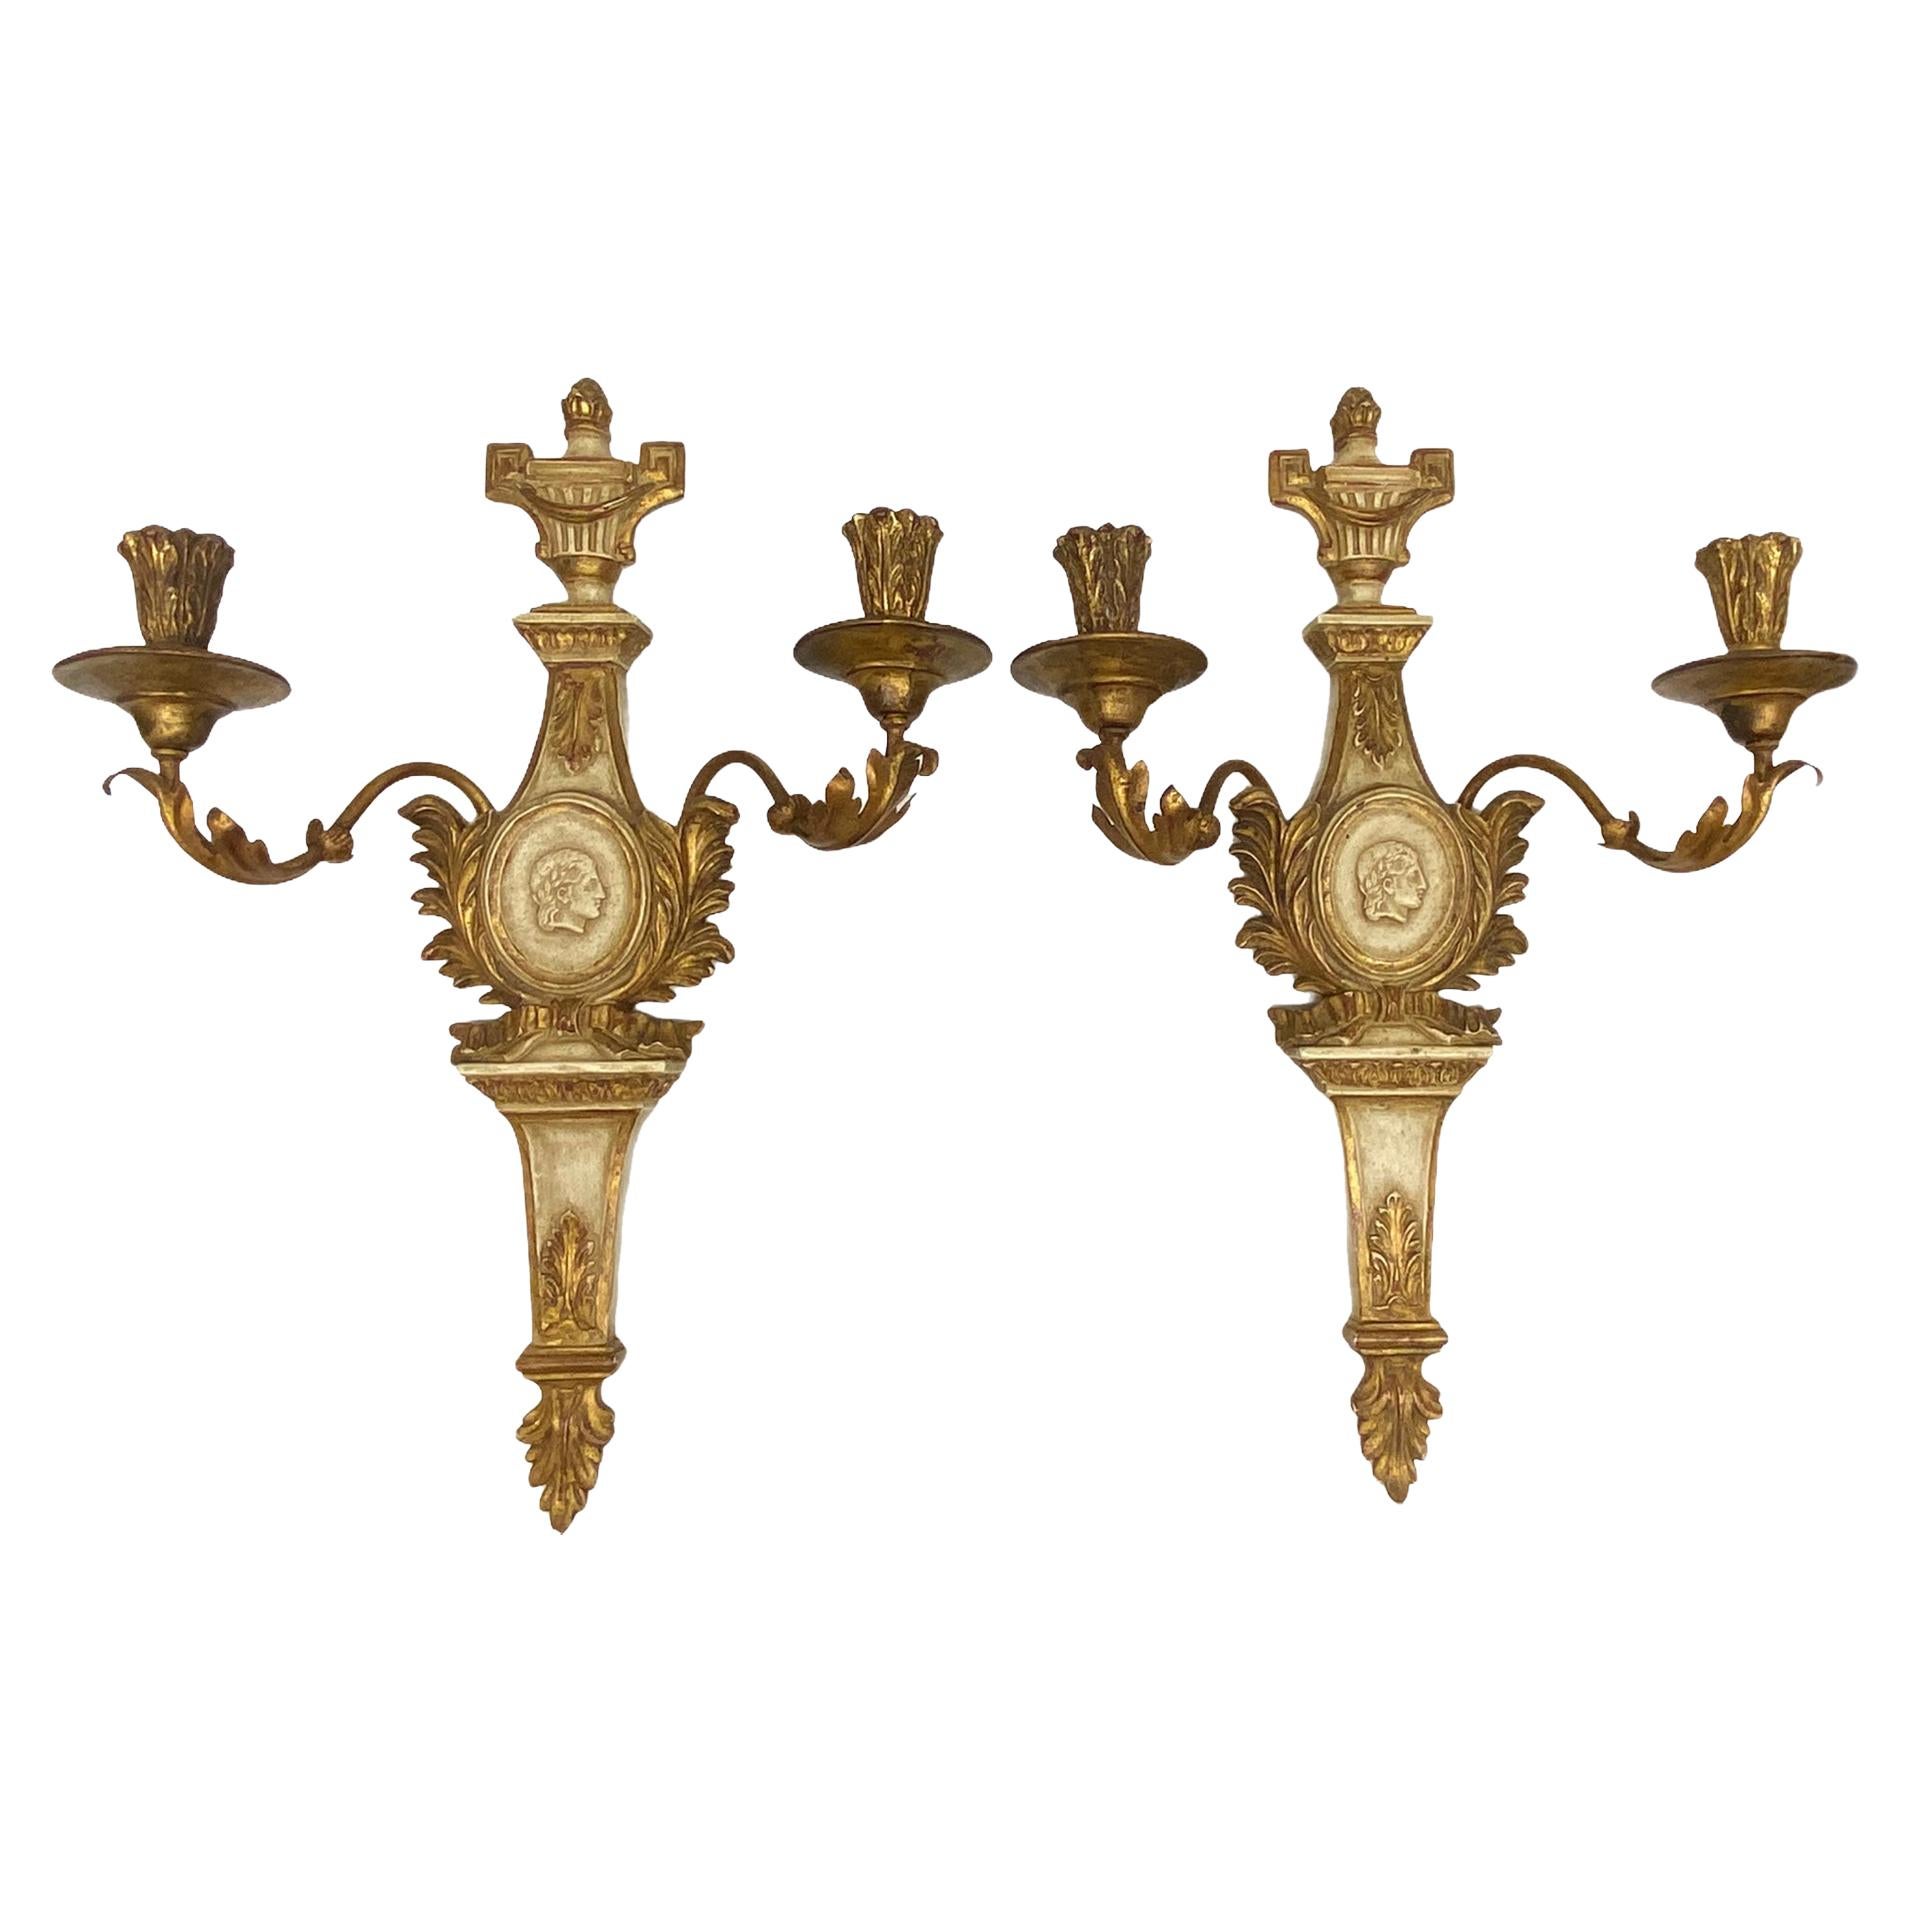 Pair of Monumental Empire Style Candle Wall Sconces Candlestick, Italy, 1970s For Sale